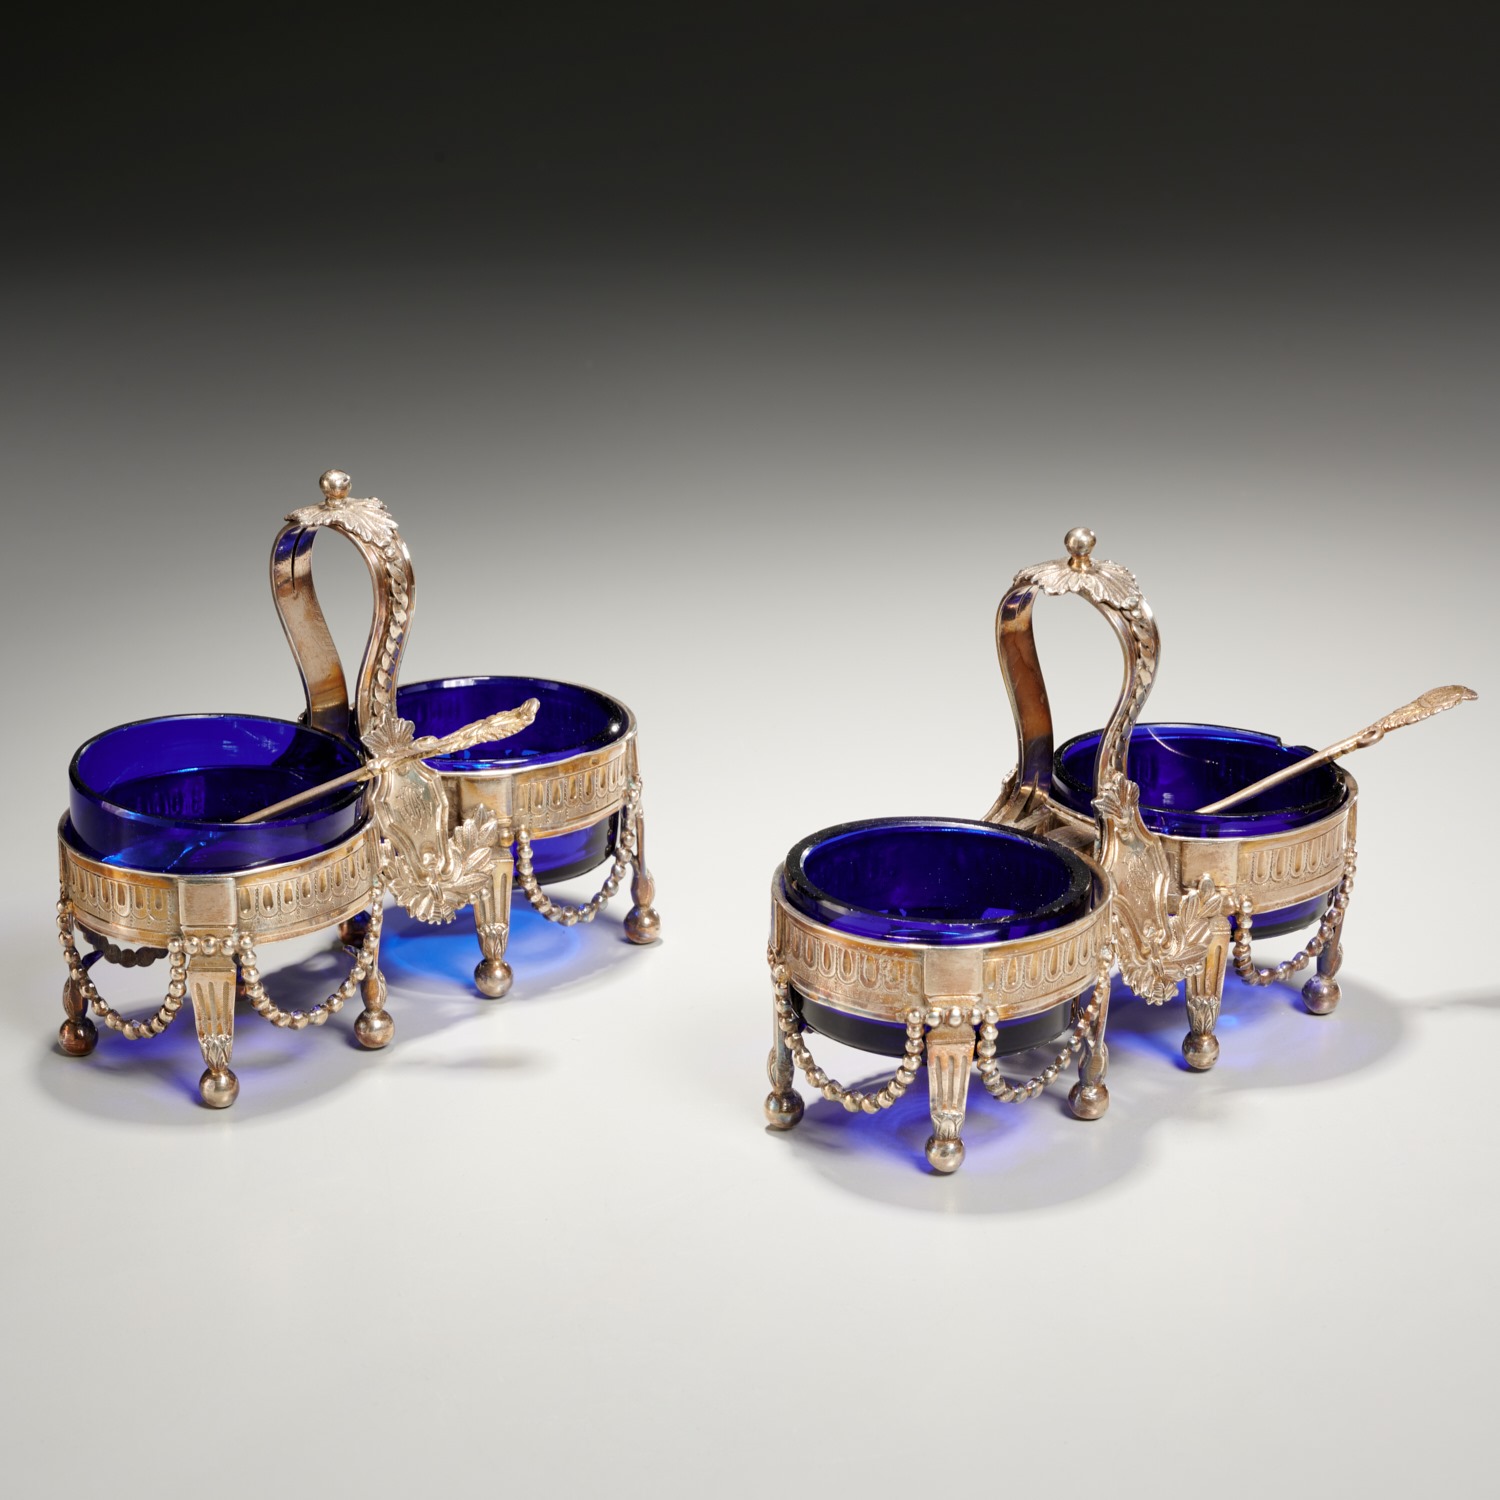 PAIR FRENCH SILVER & COBALT GLASS